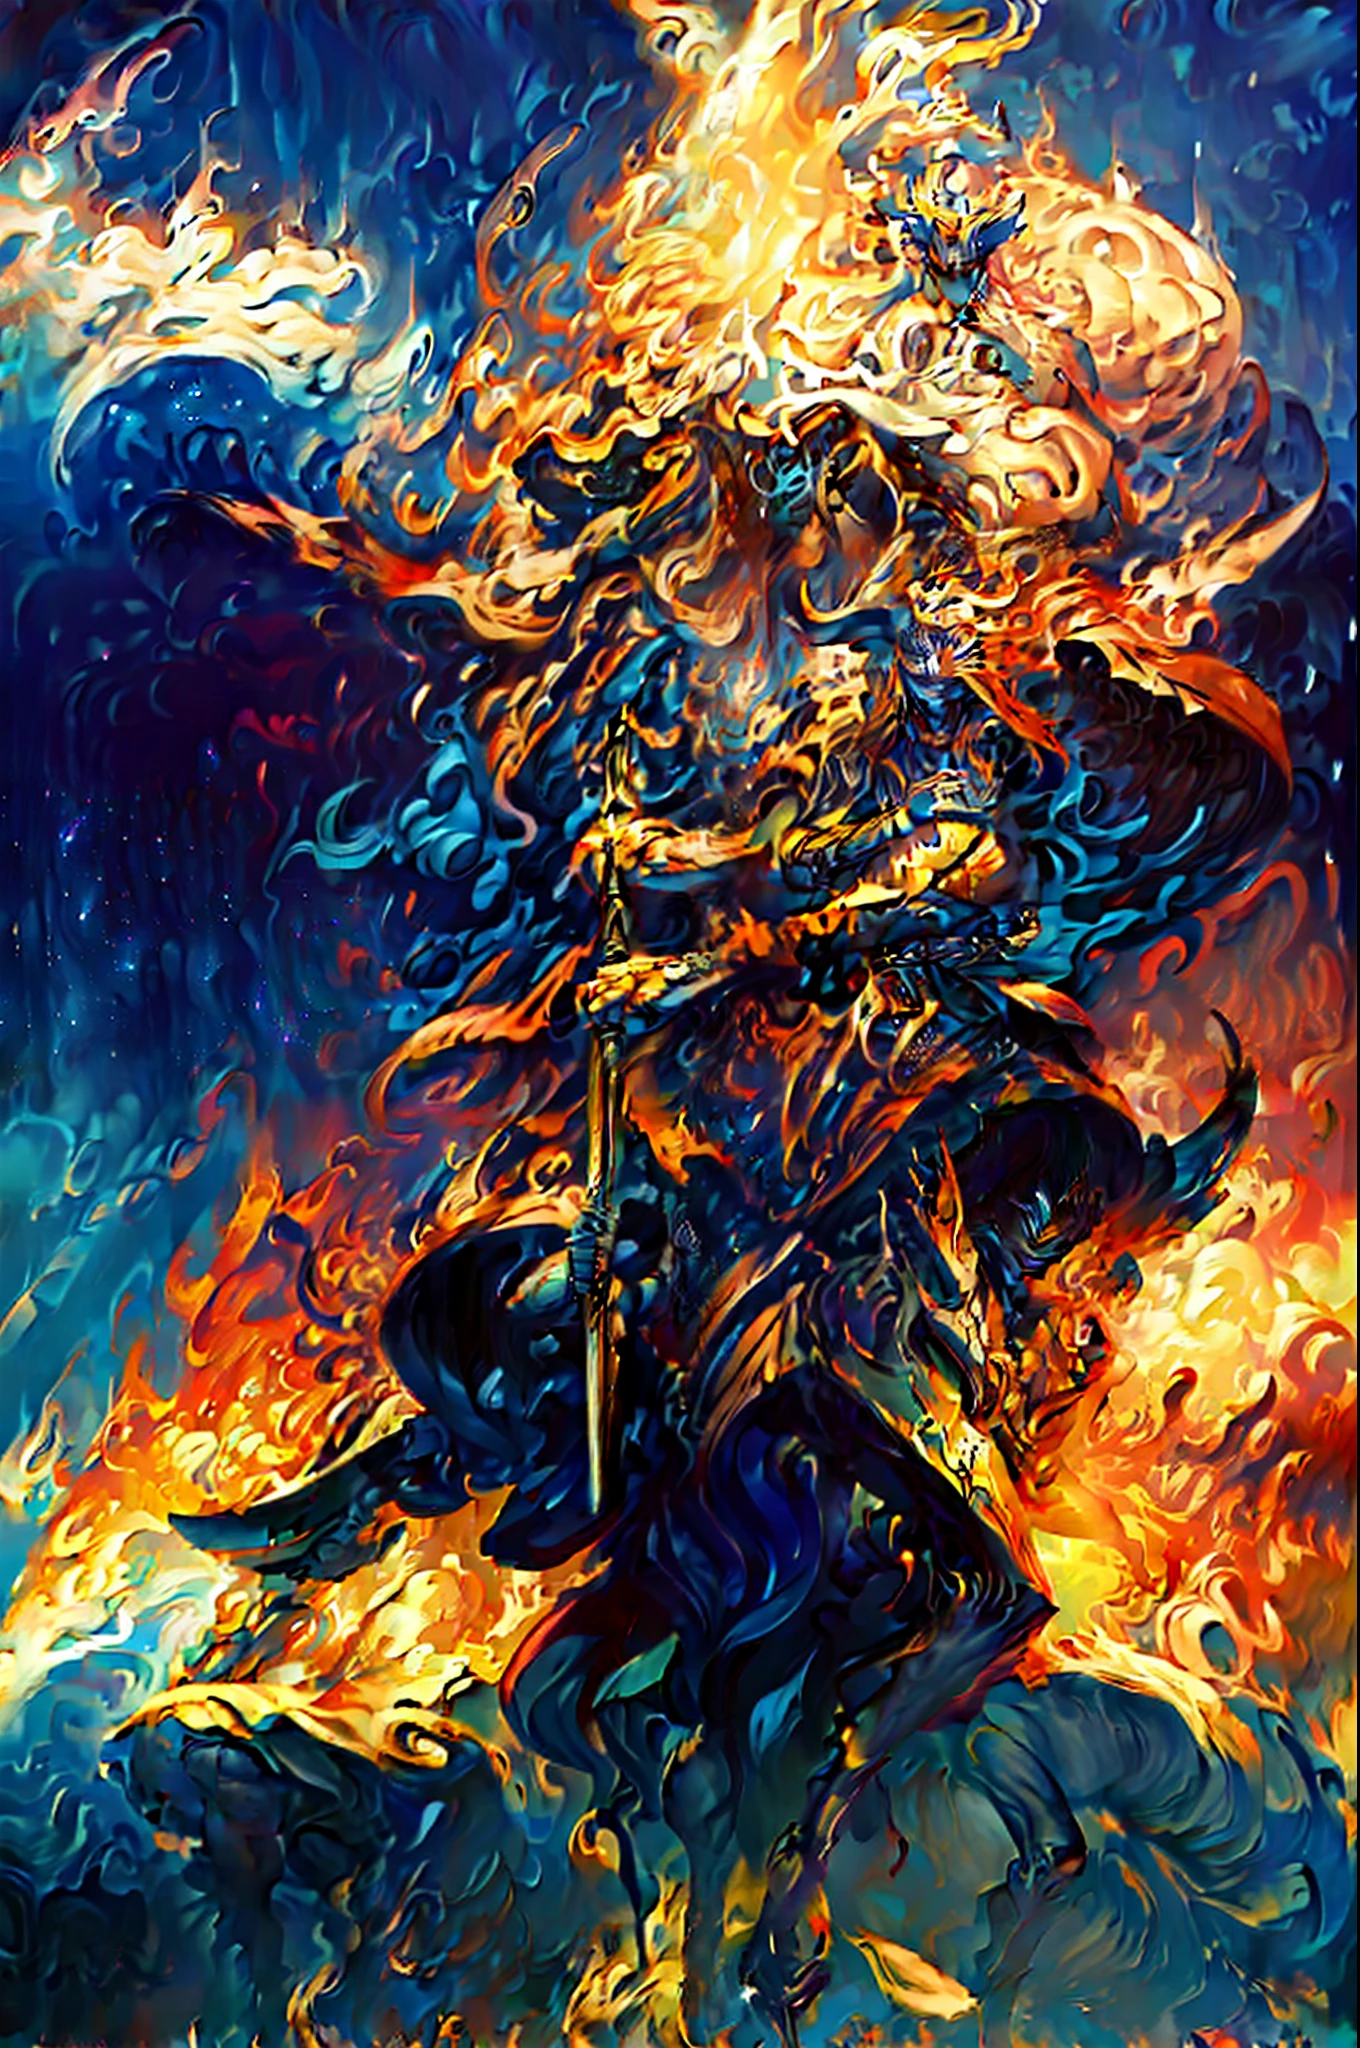 high qualiy, 4K, high resolution. God of Fire, imposing warrior, flames dancing in his eyes, fire aura surrounding your body; carries a flaming spear; golden skin, hair made of flames. serious face, front-facing.